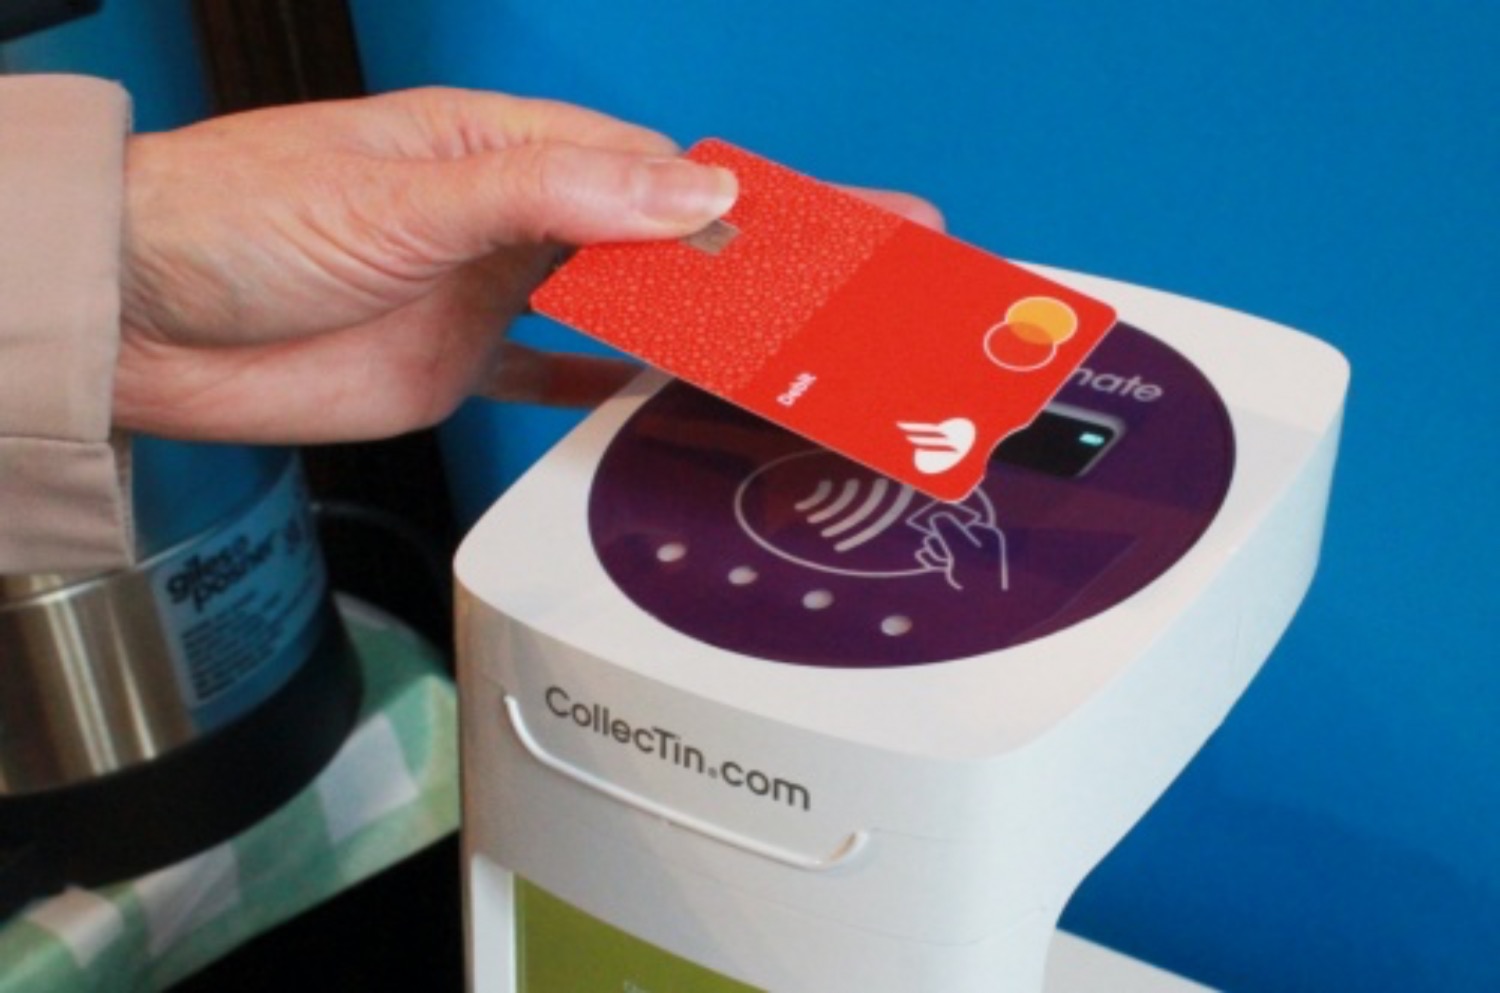 Someone tapping a bank card on a contactless payment system